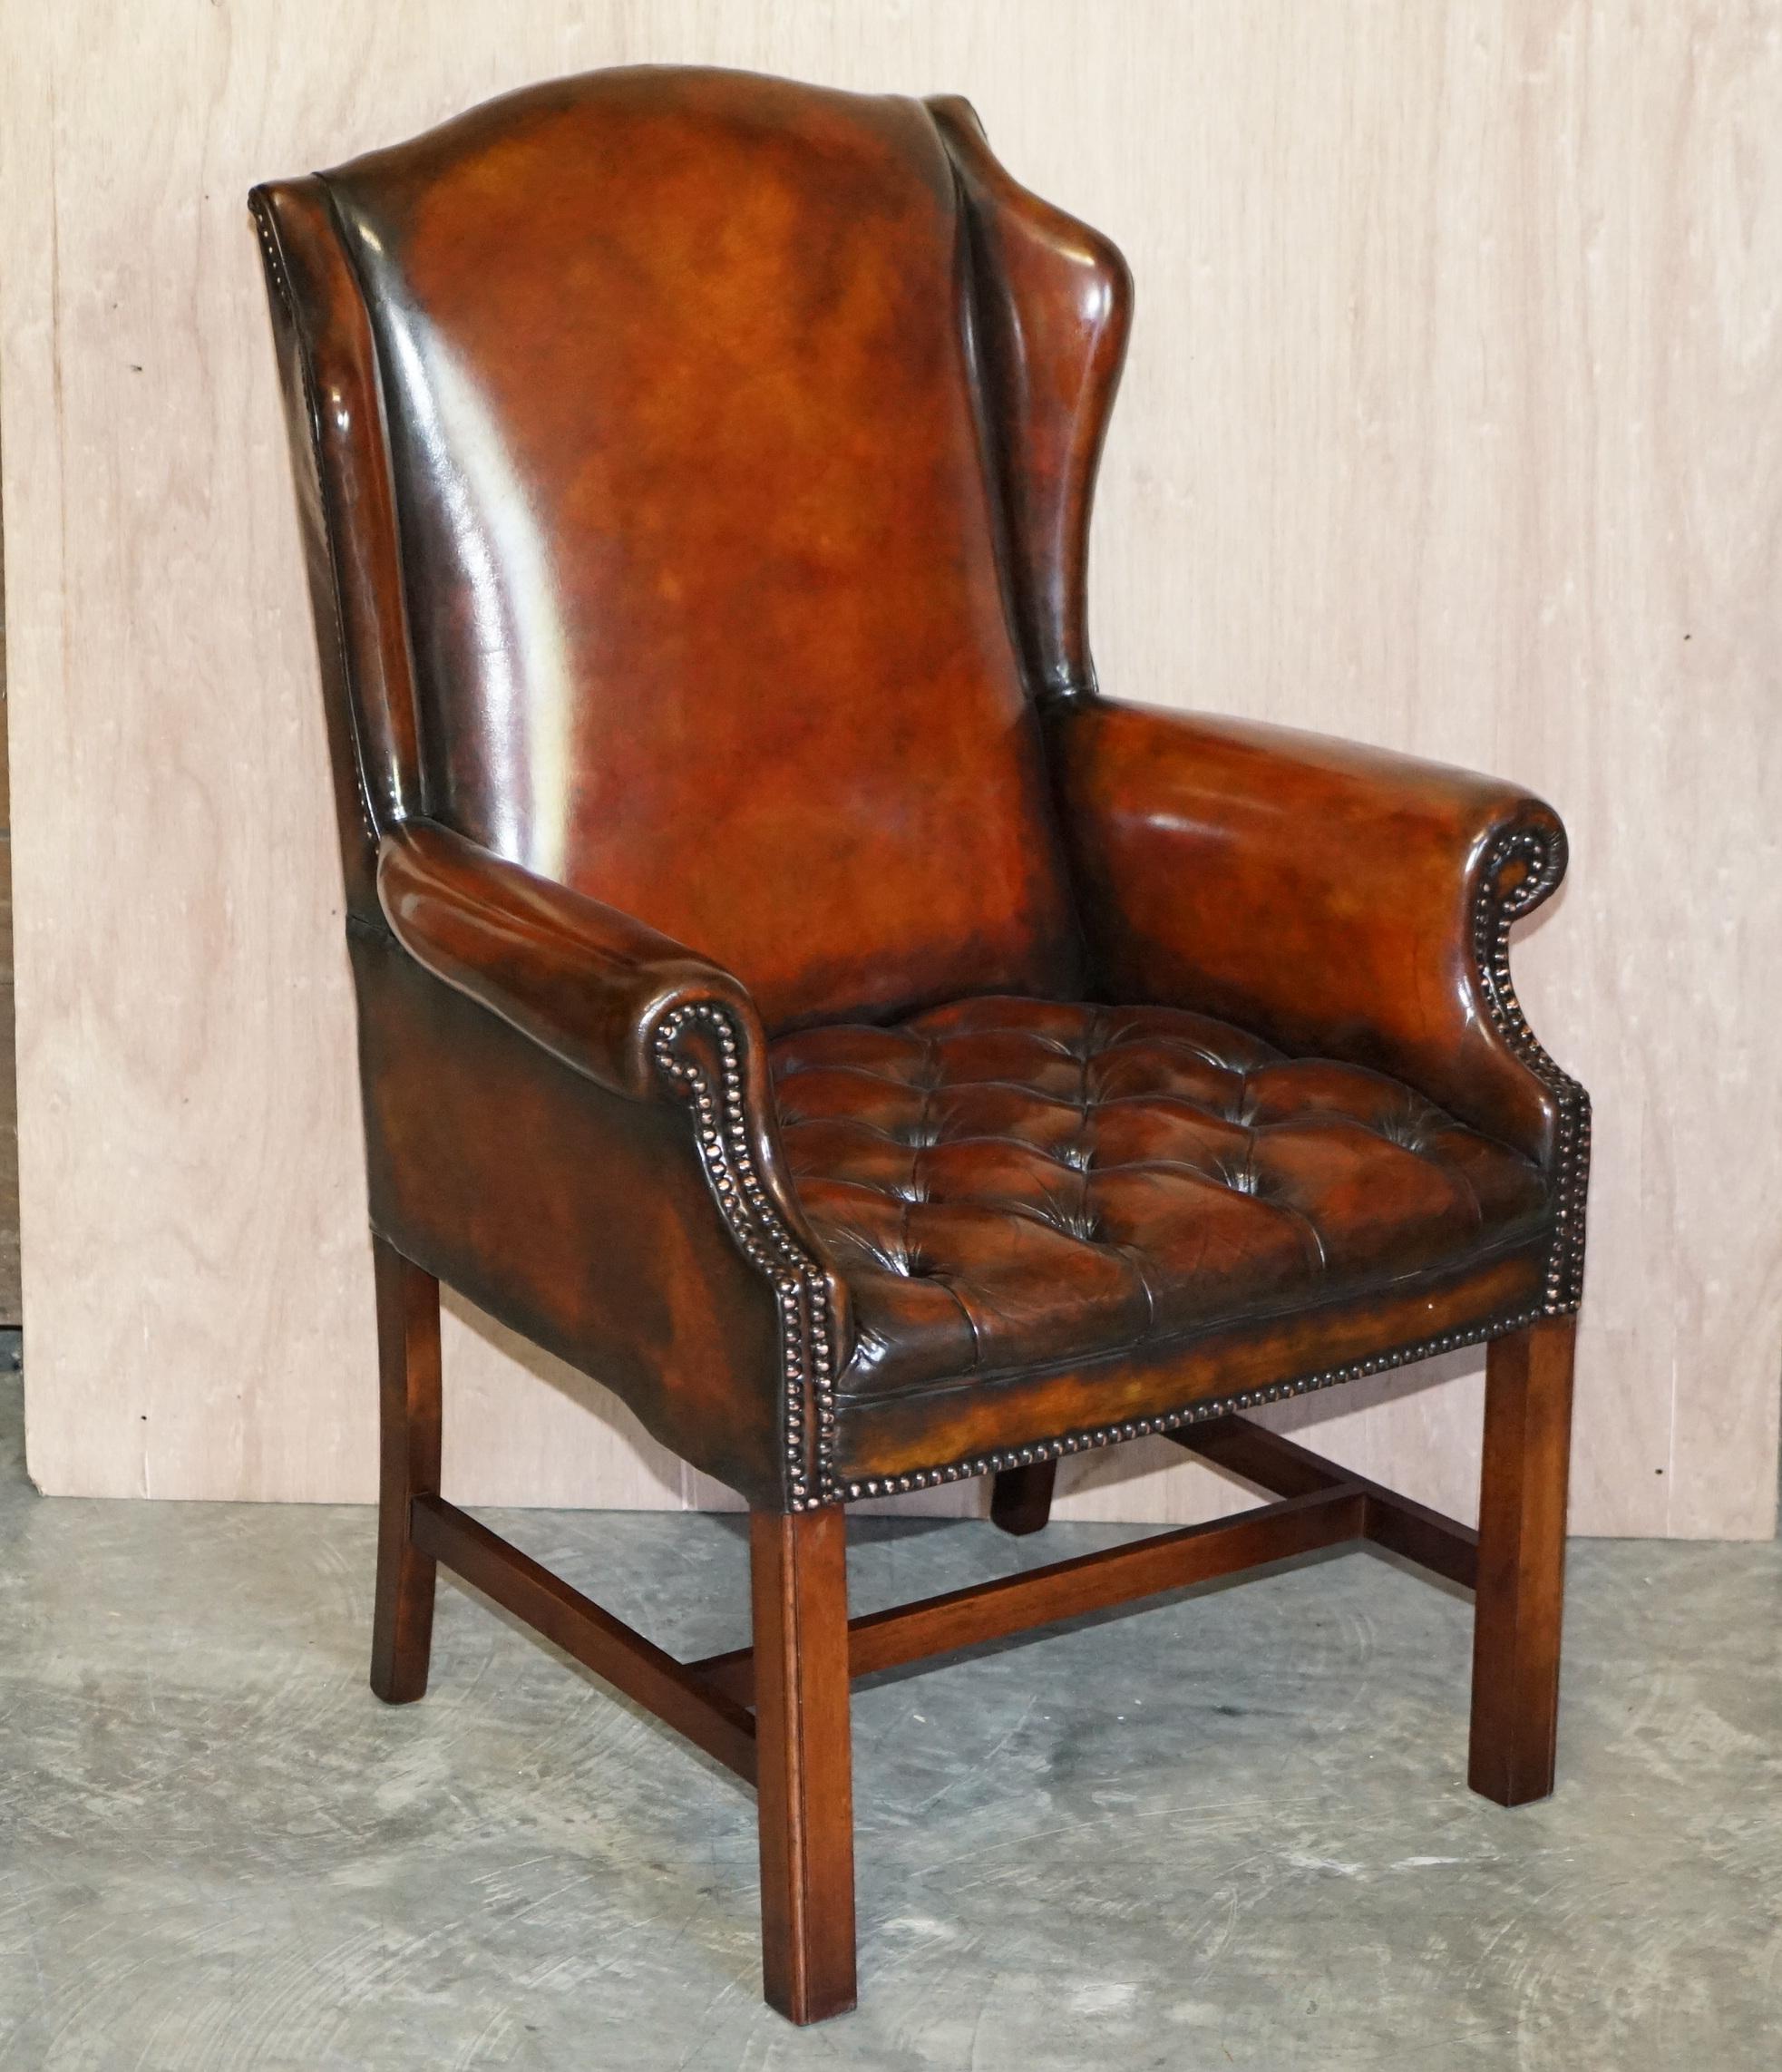 Royal House Antiques

Royal House Antiques is delighted to this stunning pair of fully restored hand dyed Whisky brown leather wade upholstery Wingback armchairs

They were made by Wade Upholstery, they are mid century examples and a rare size